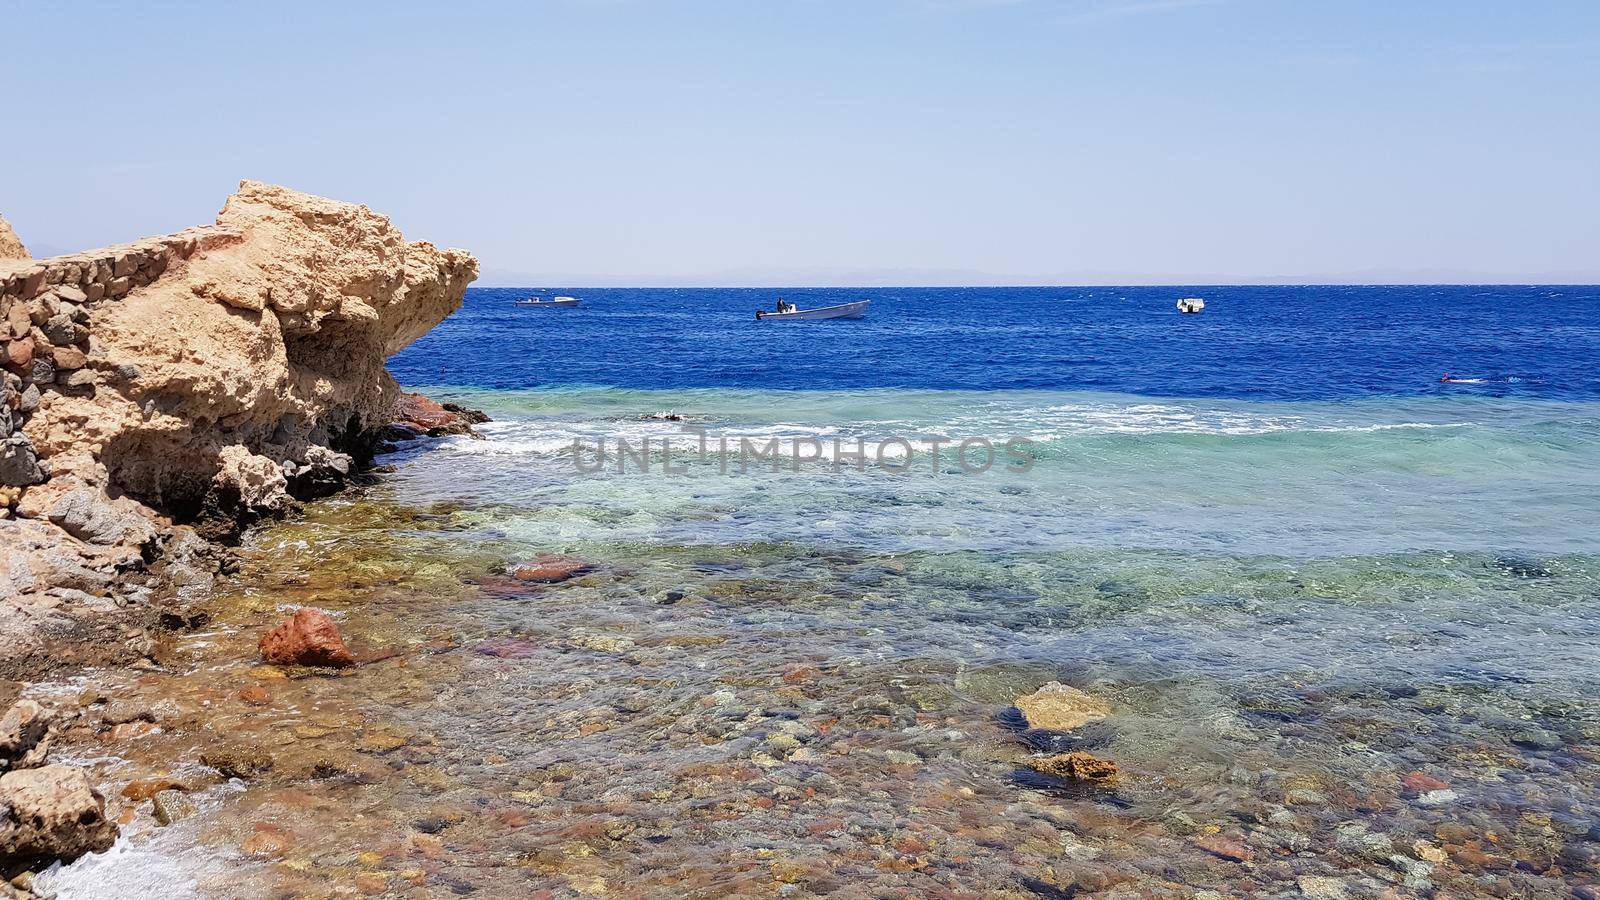 The Blue Hole is a popular diving spot in East Sinai. Sunny beach resort on the Red Sea in Dahab. A famous tourist destination near Sharm el Sheikh. Bright sunshine.